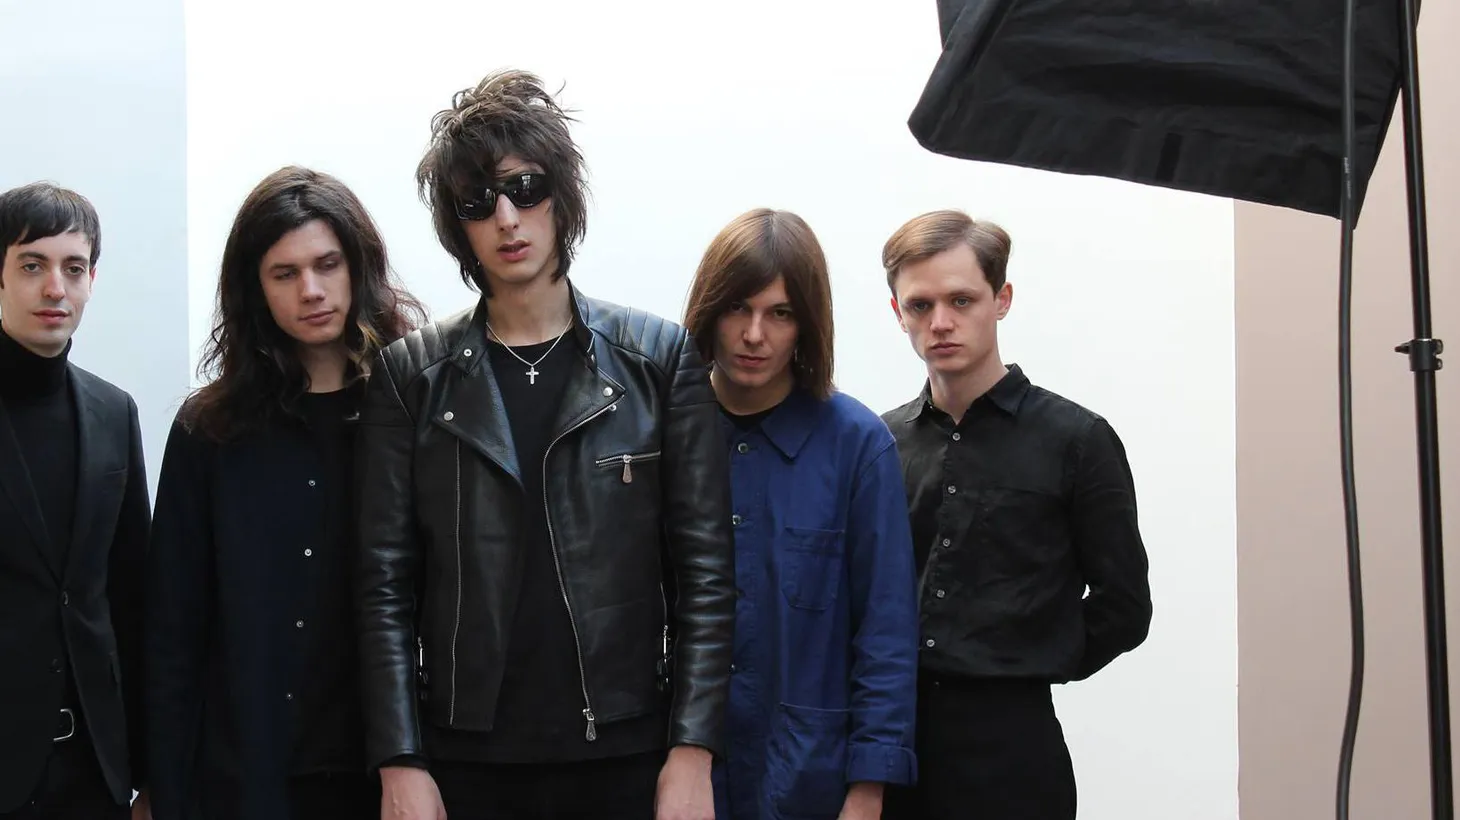 The Horrors infectious rock veers towards the dark side with flashes of pyschedelia.